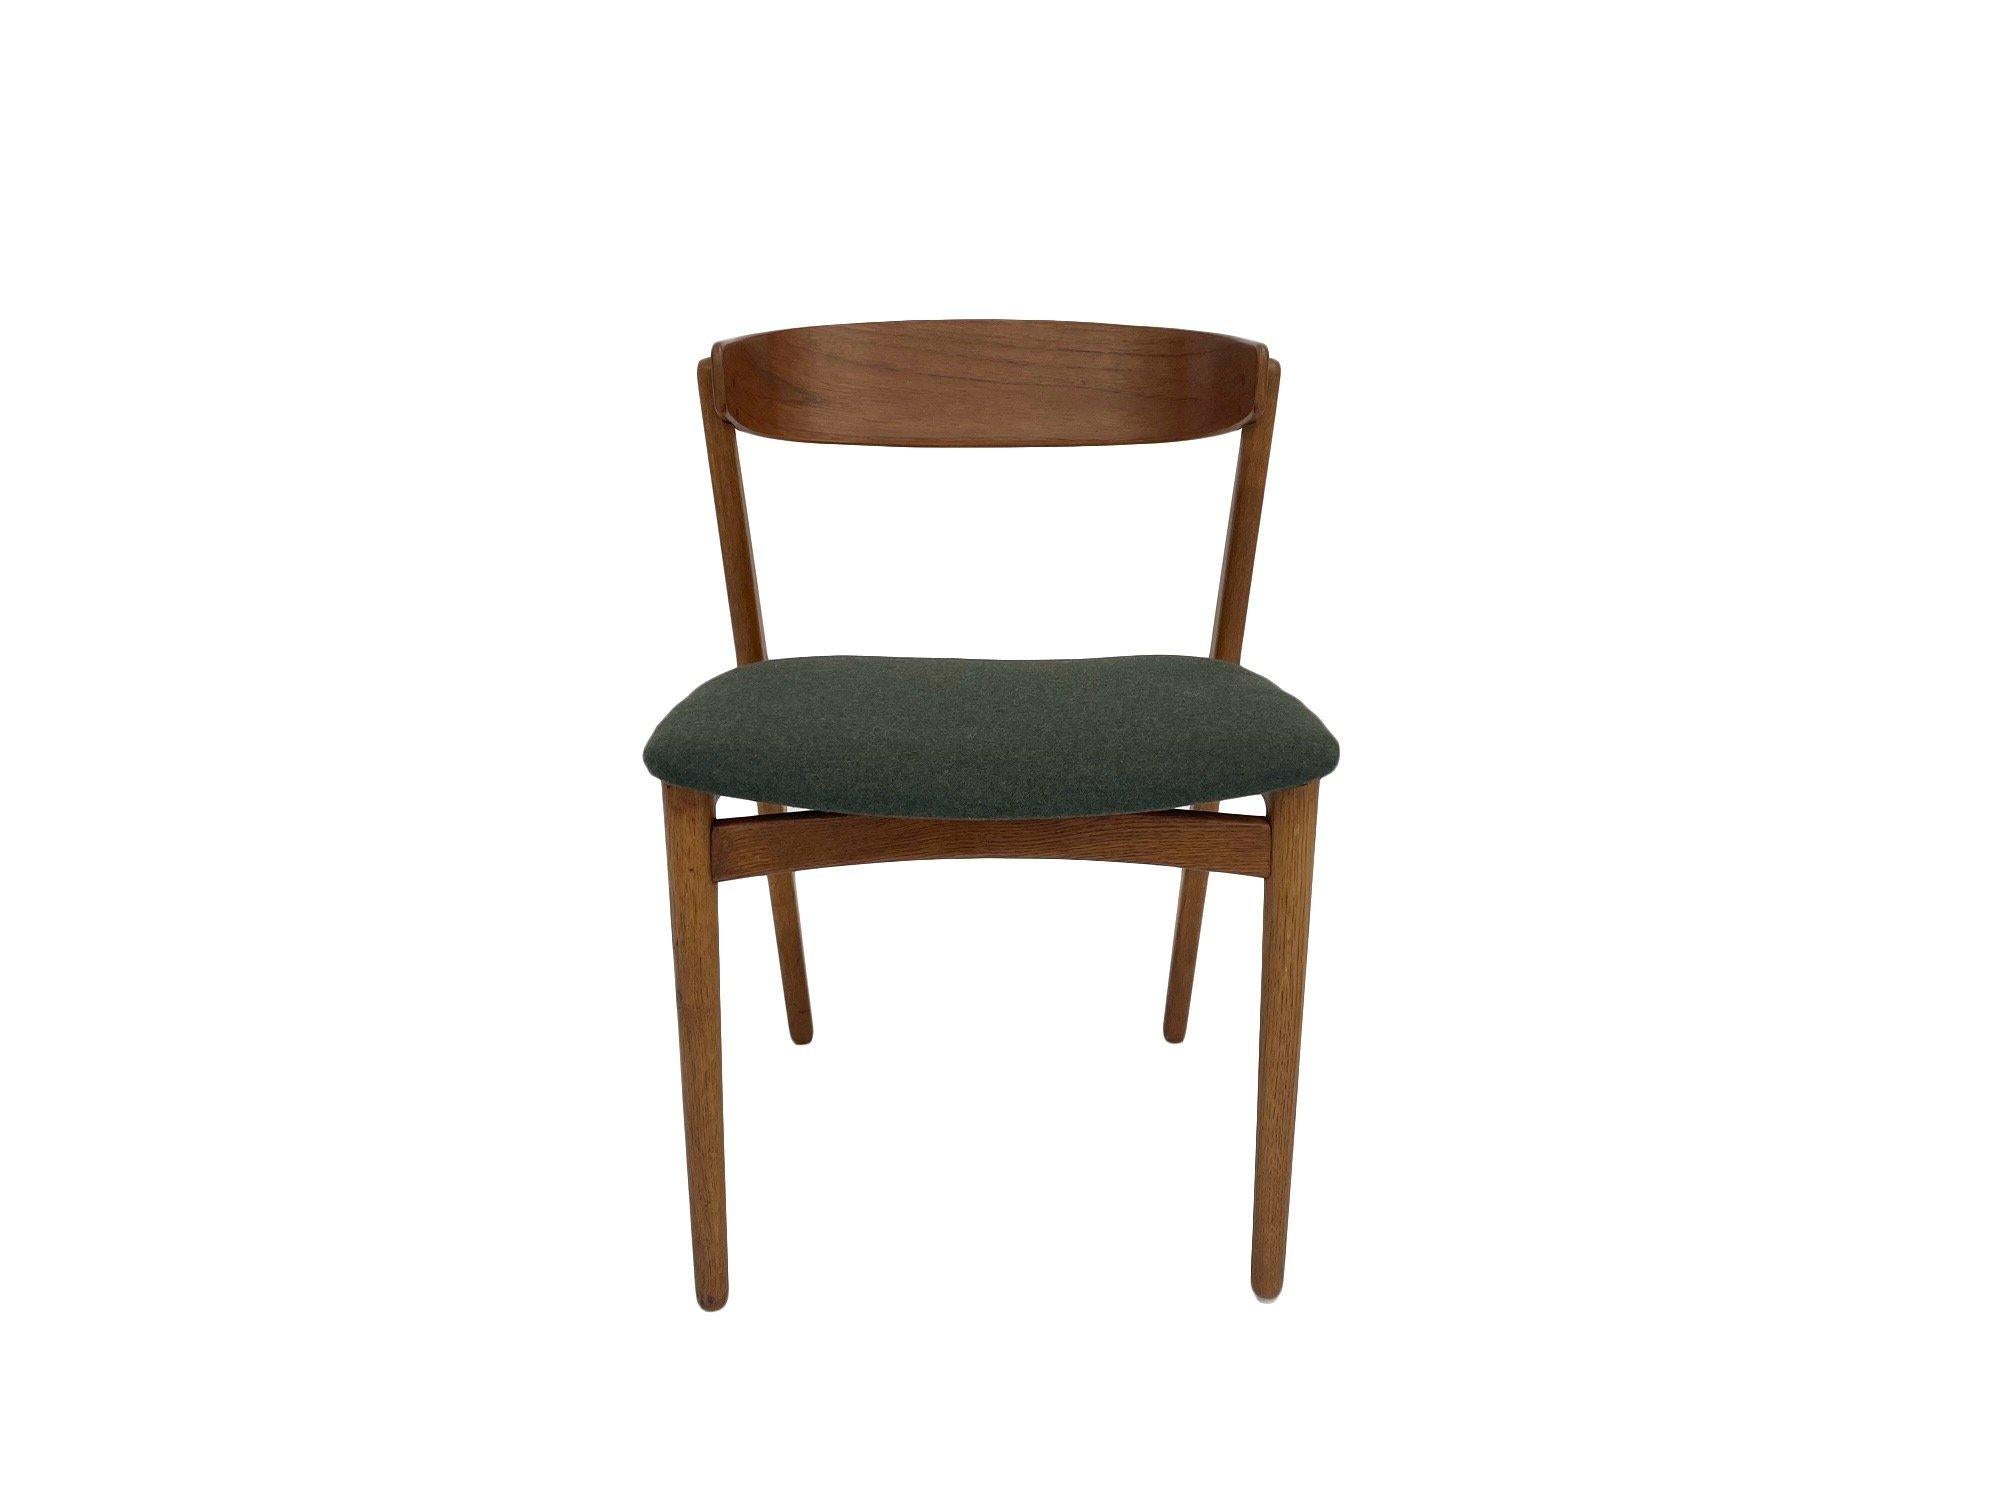 A rare Danish Model 206 oak and teak green wool desk chair by Farstrup, this would make a stylish addition to any living or work area.

The chair has a wide seat and sculptured backrest for enhanced comfort. A striking piece of classic